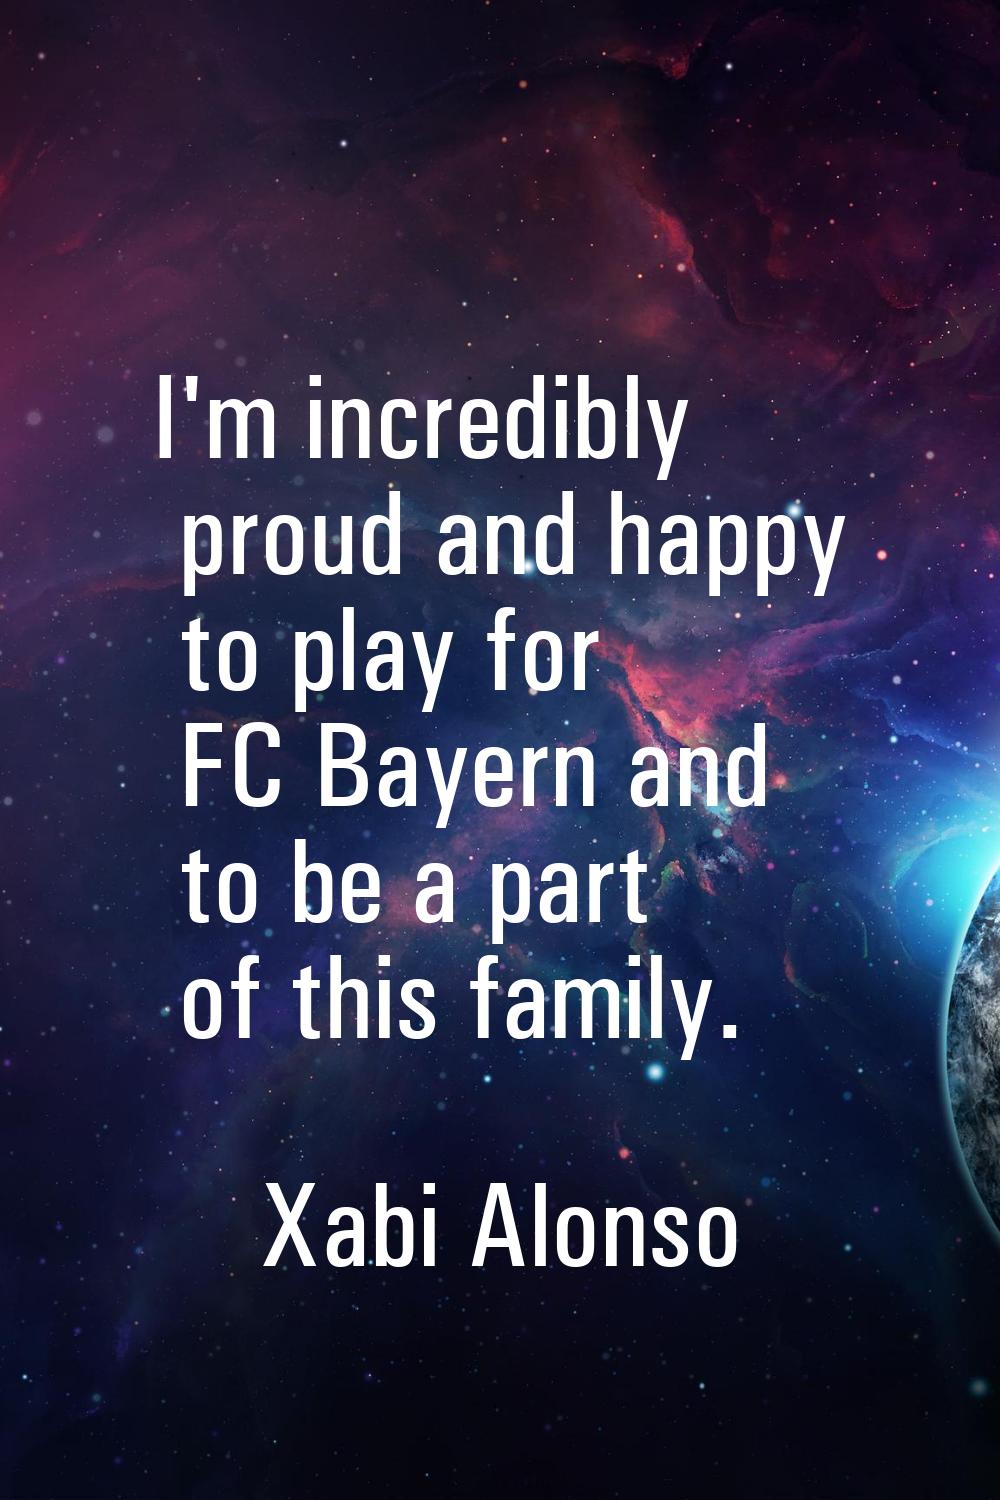 I'm incredibly proud and happy to play for FC Bayern and to be a part of this family.